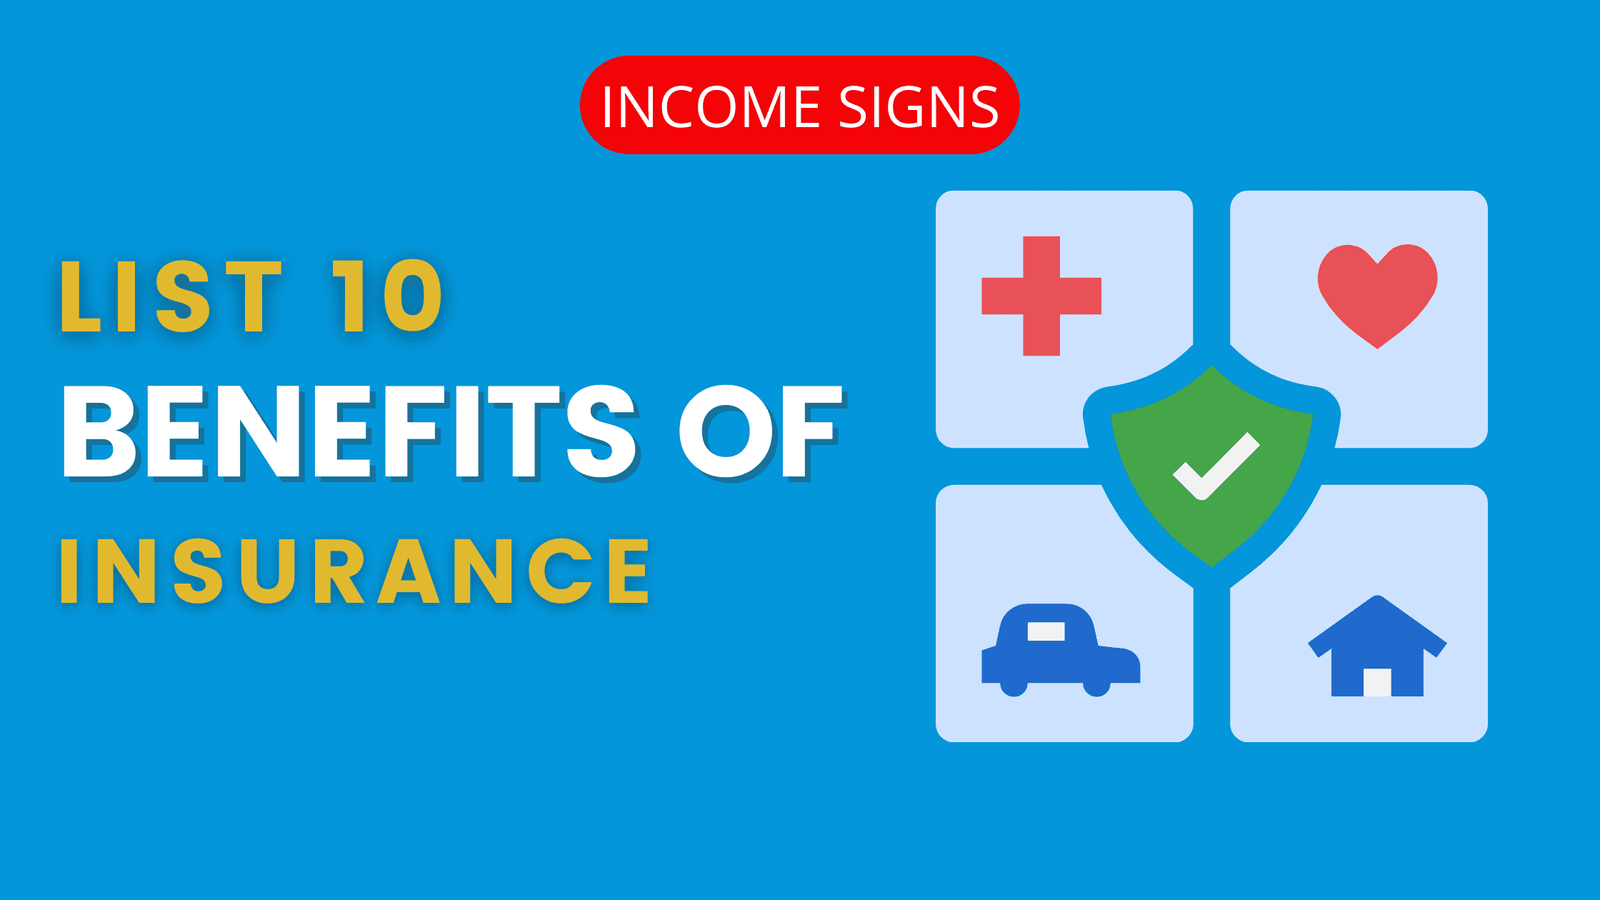 List 10 Benefit of Insurance - Income Signs